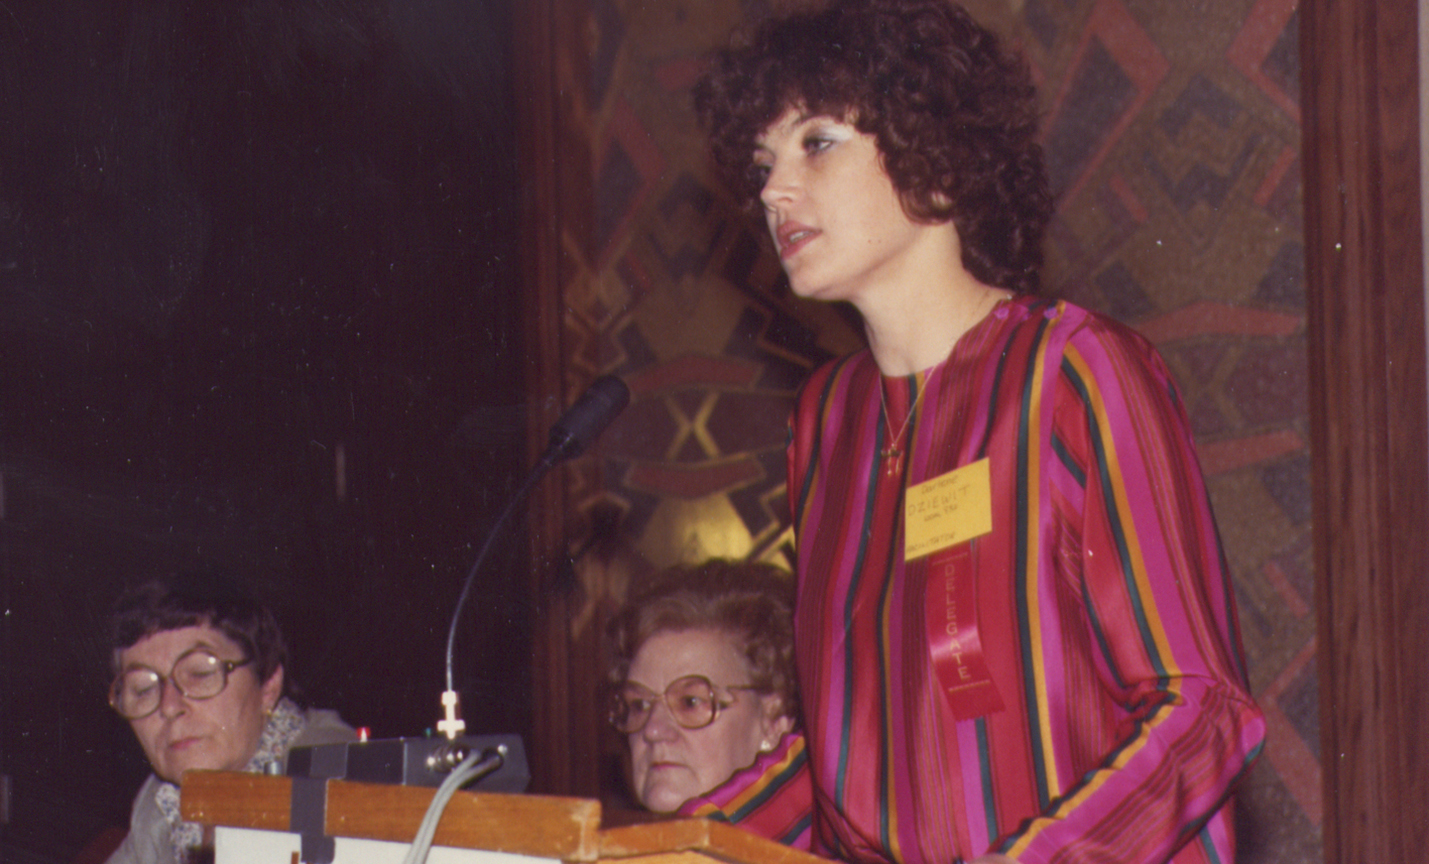 Darlene Dziewit standing at podium, in background next to podium two other women are listening.